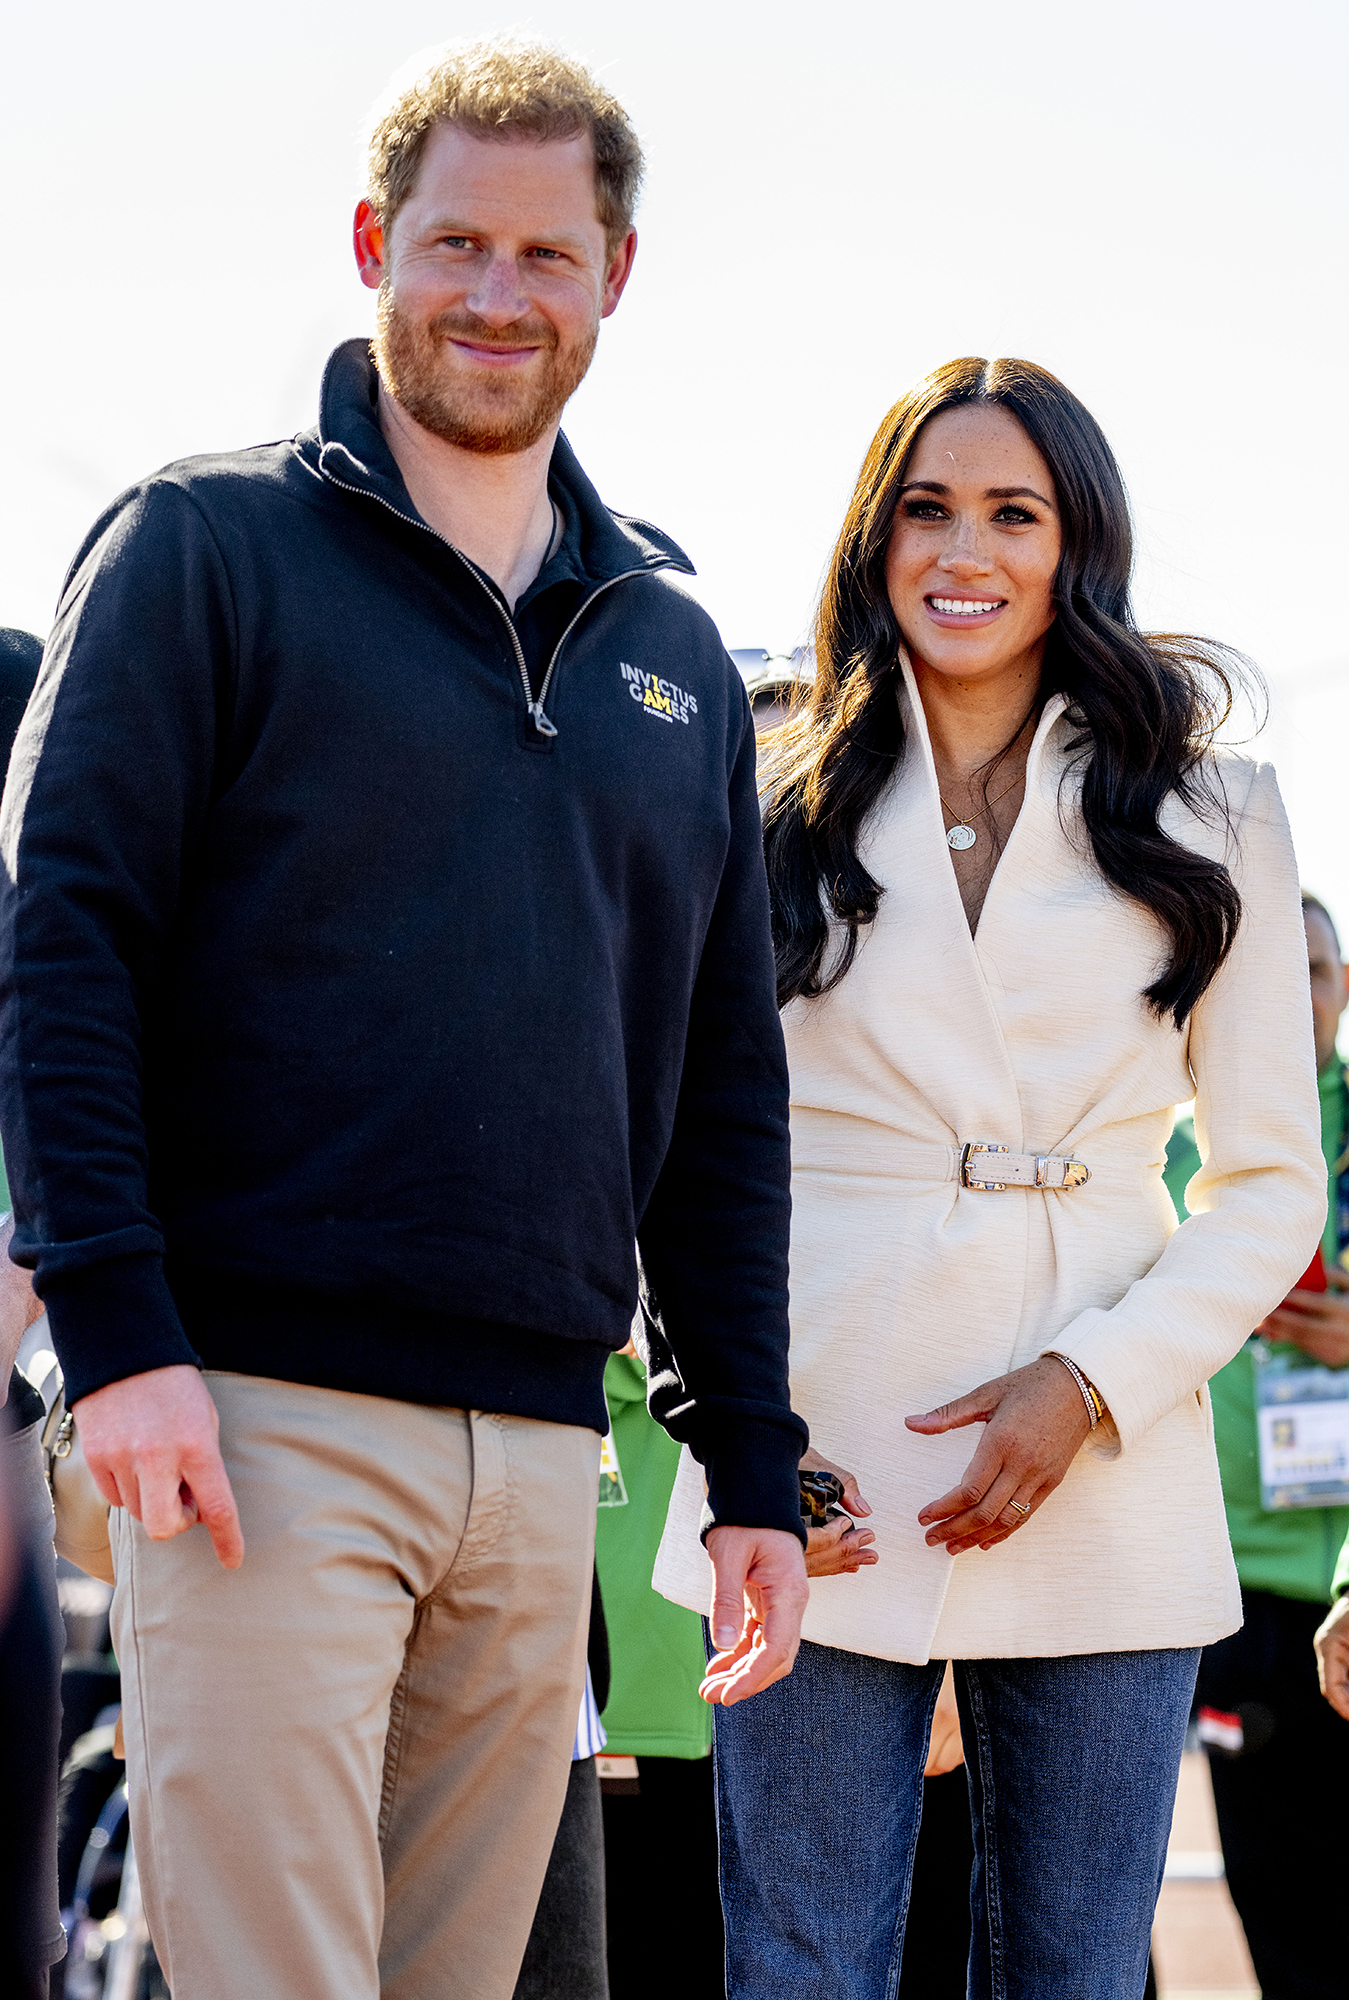 Royal Family Wishes Prince Harry and Meghan Markle's Daughter a Happy 1st Birthday Amid Platinum Jubilee U.K. Visit